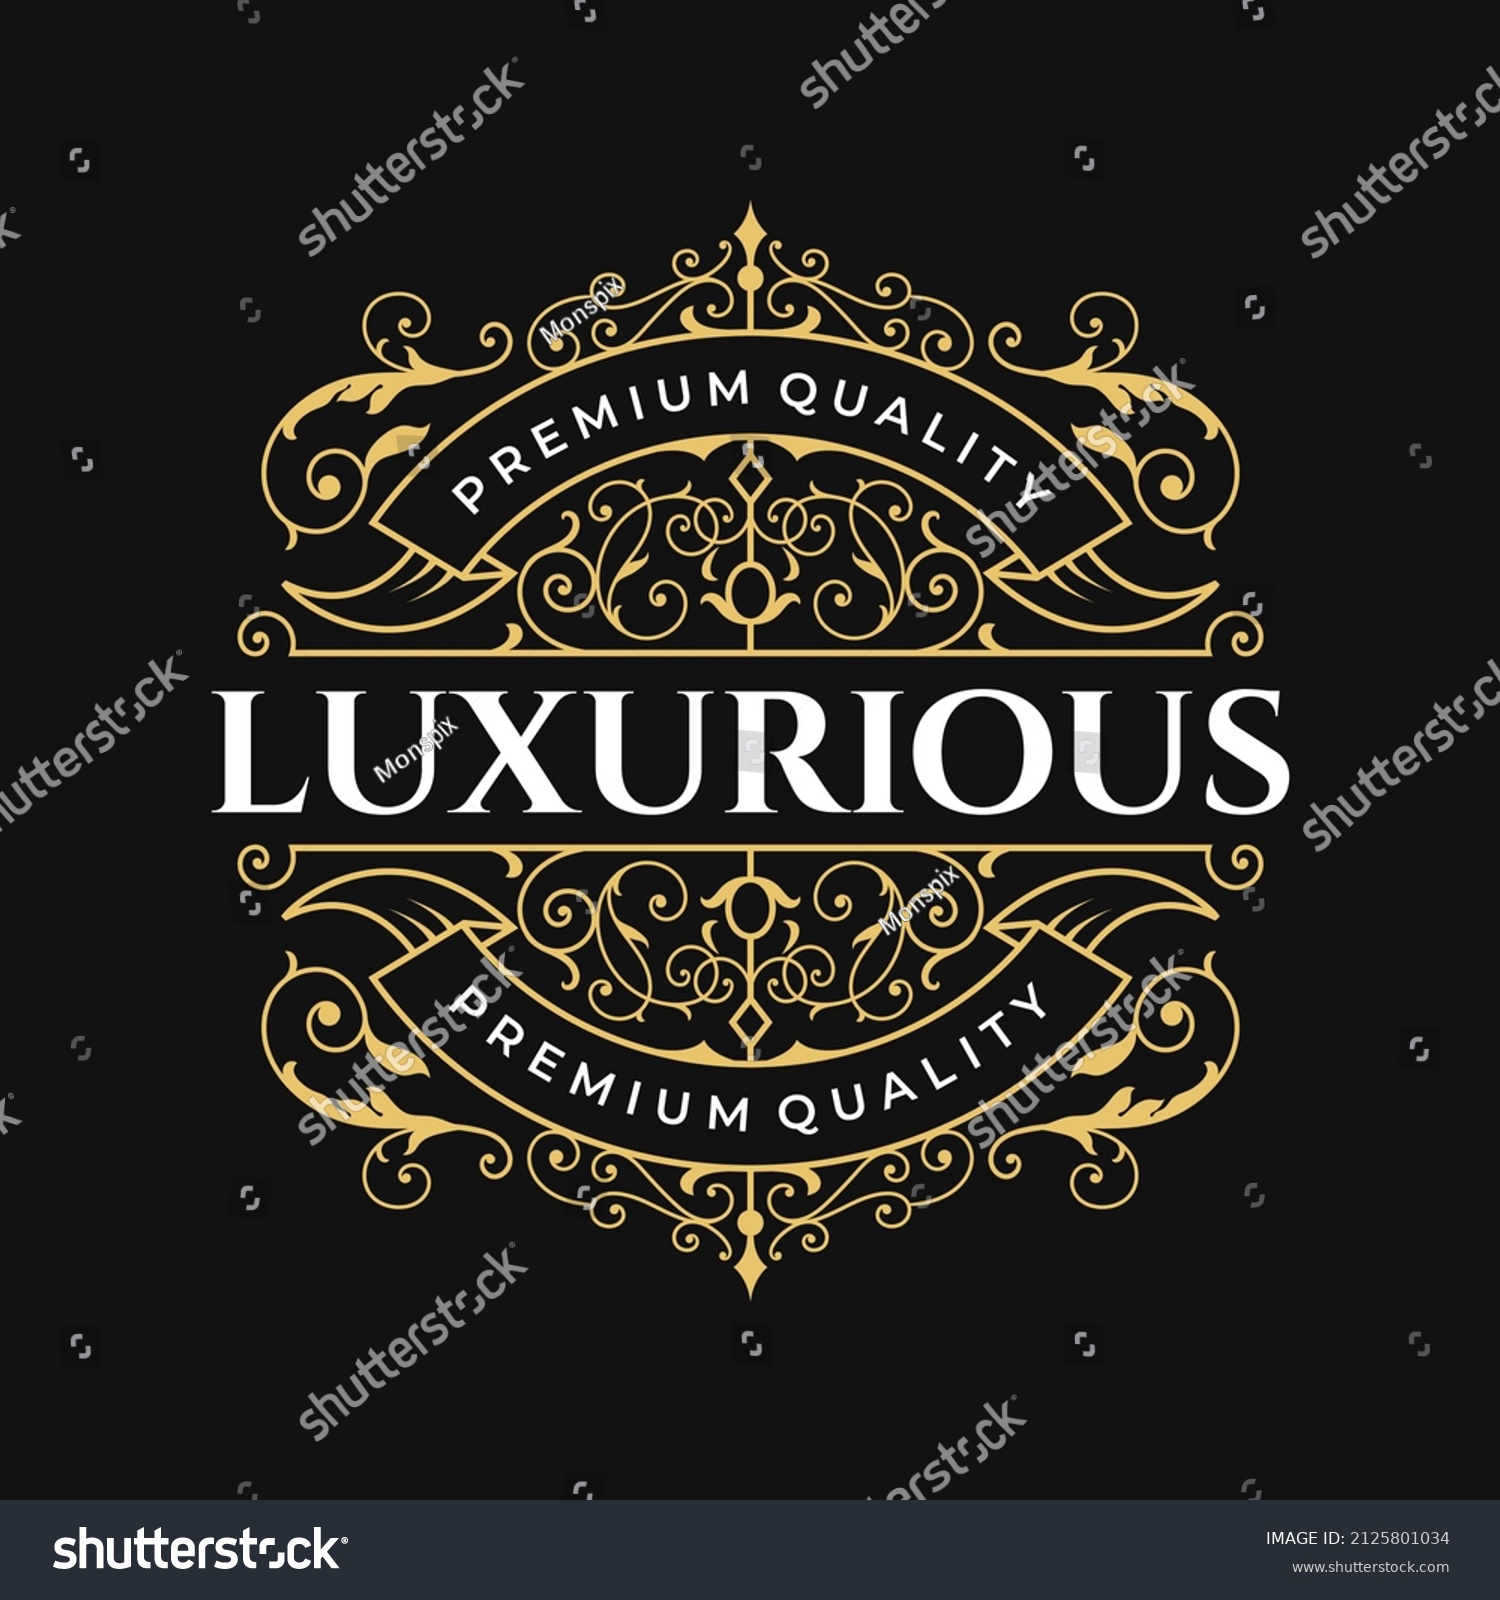 Vintage luxury ornamental logo with floral ornament. Flourishes frame. Antique label suitable for whiskey label, wine, beer, brewing, salon, shop, boutique, hotel, etc. #2125801034